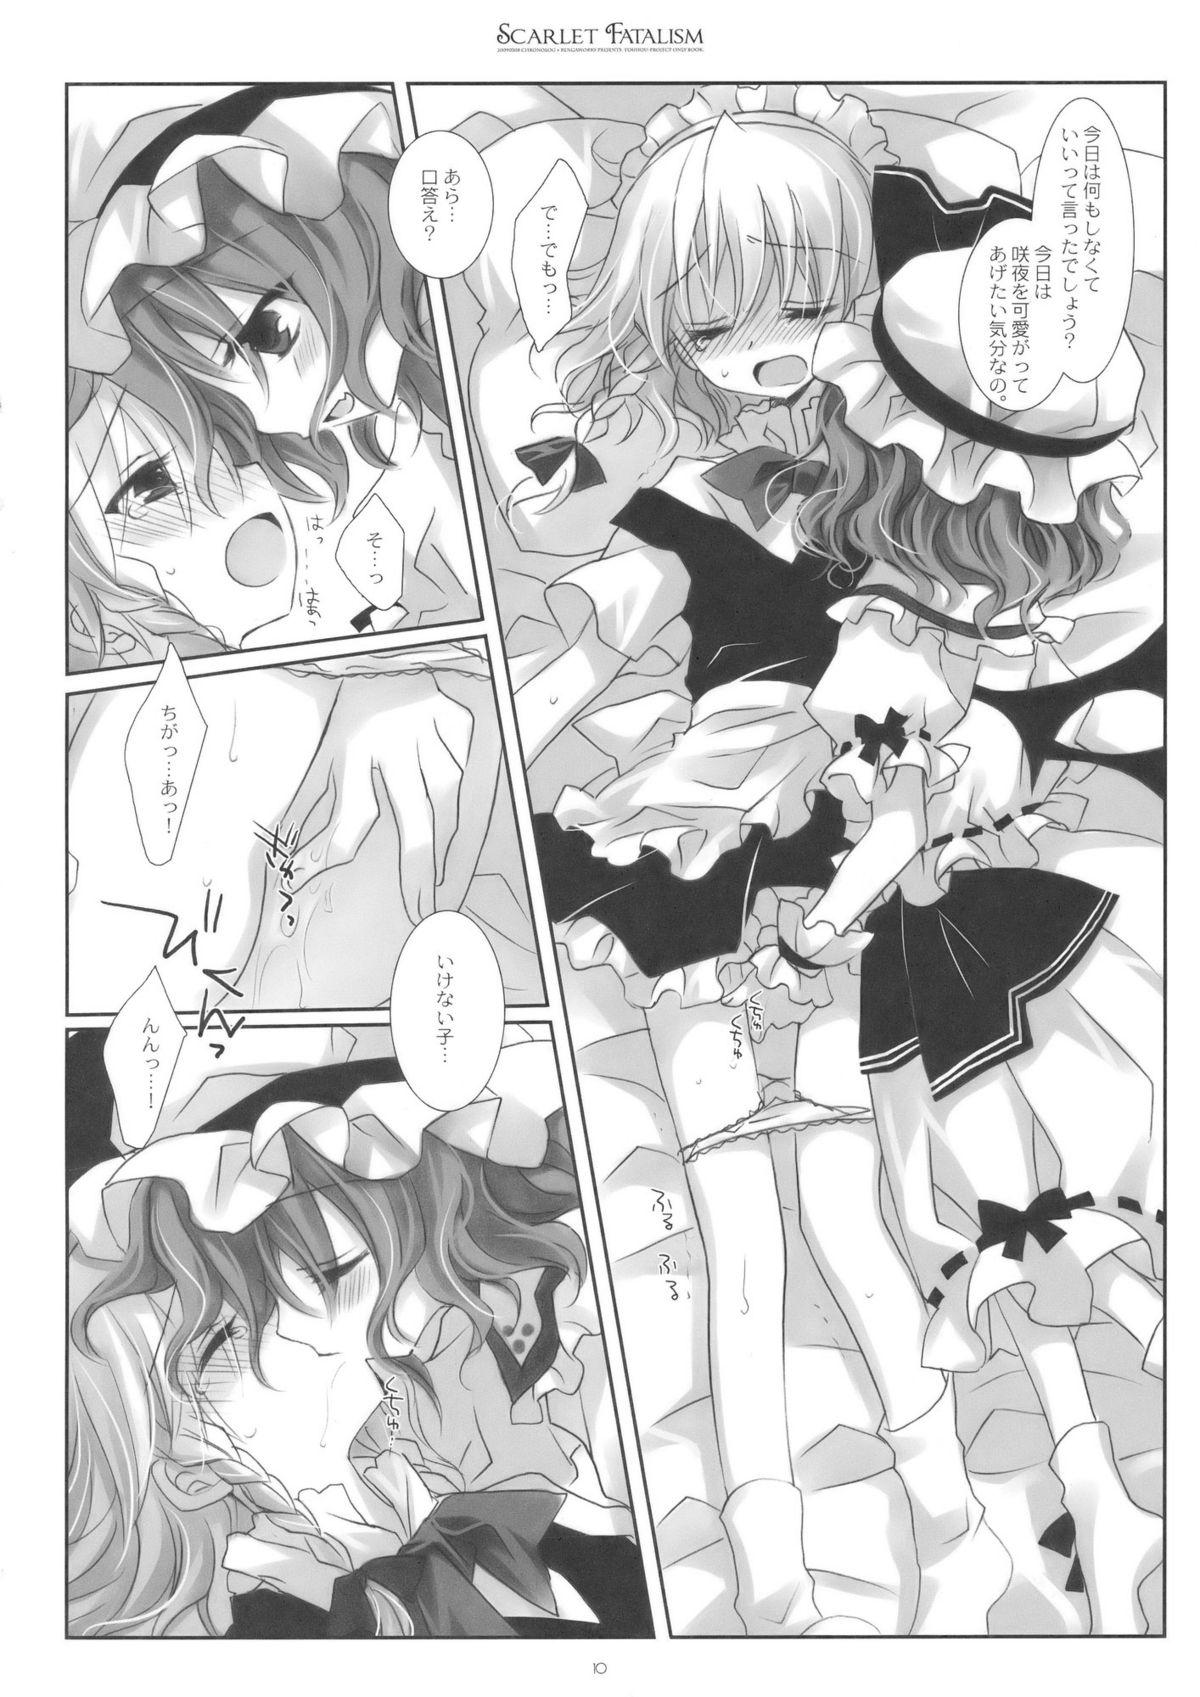 Blowjob Scarlet Fatalism - Touhou project Tinytits - Page 10